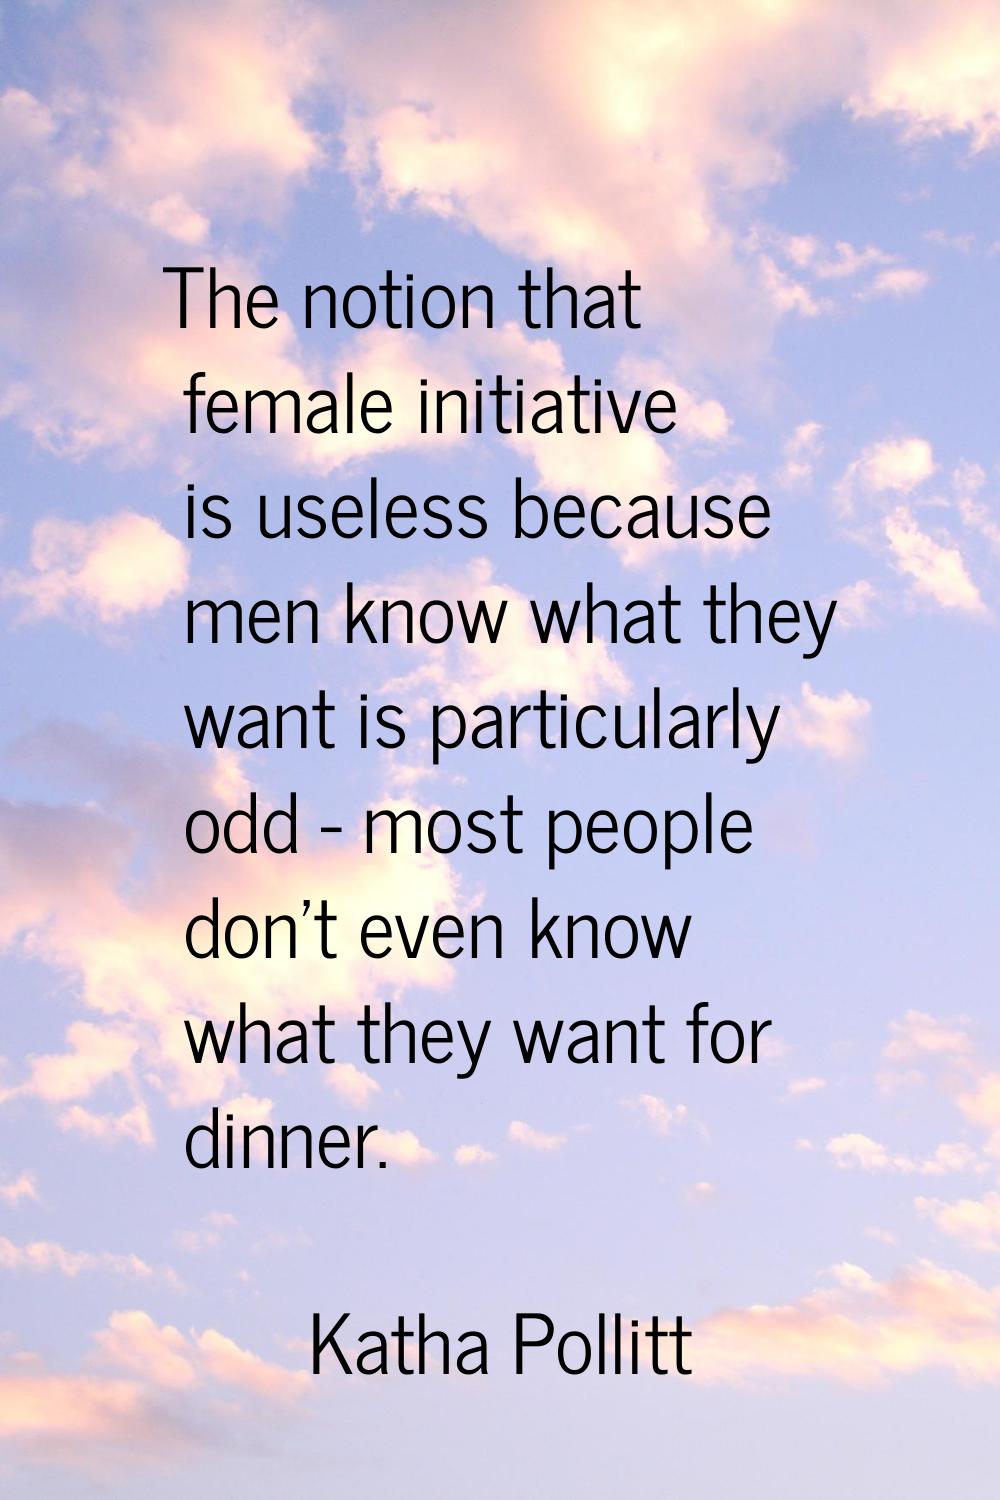 The notion that female initiative is useless because men know what they want is particularly odd - 